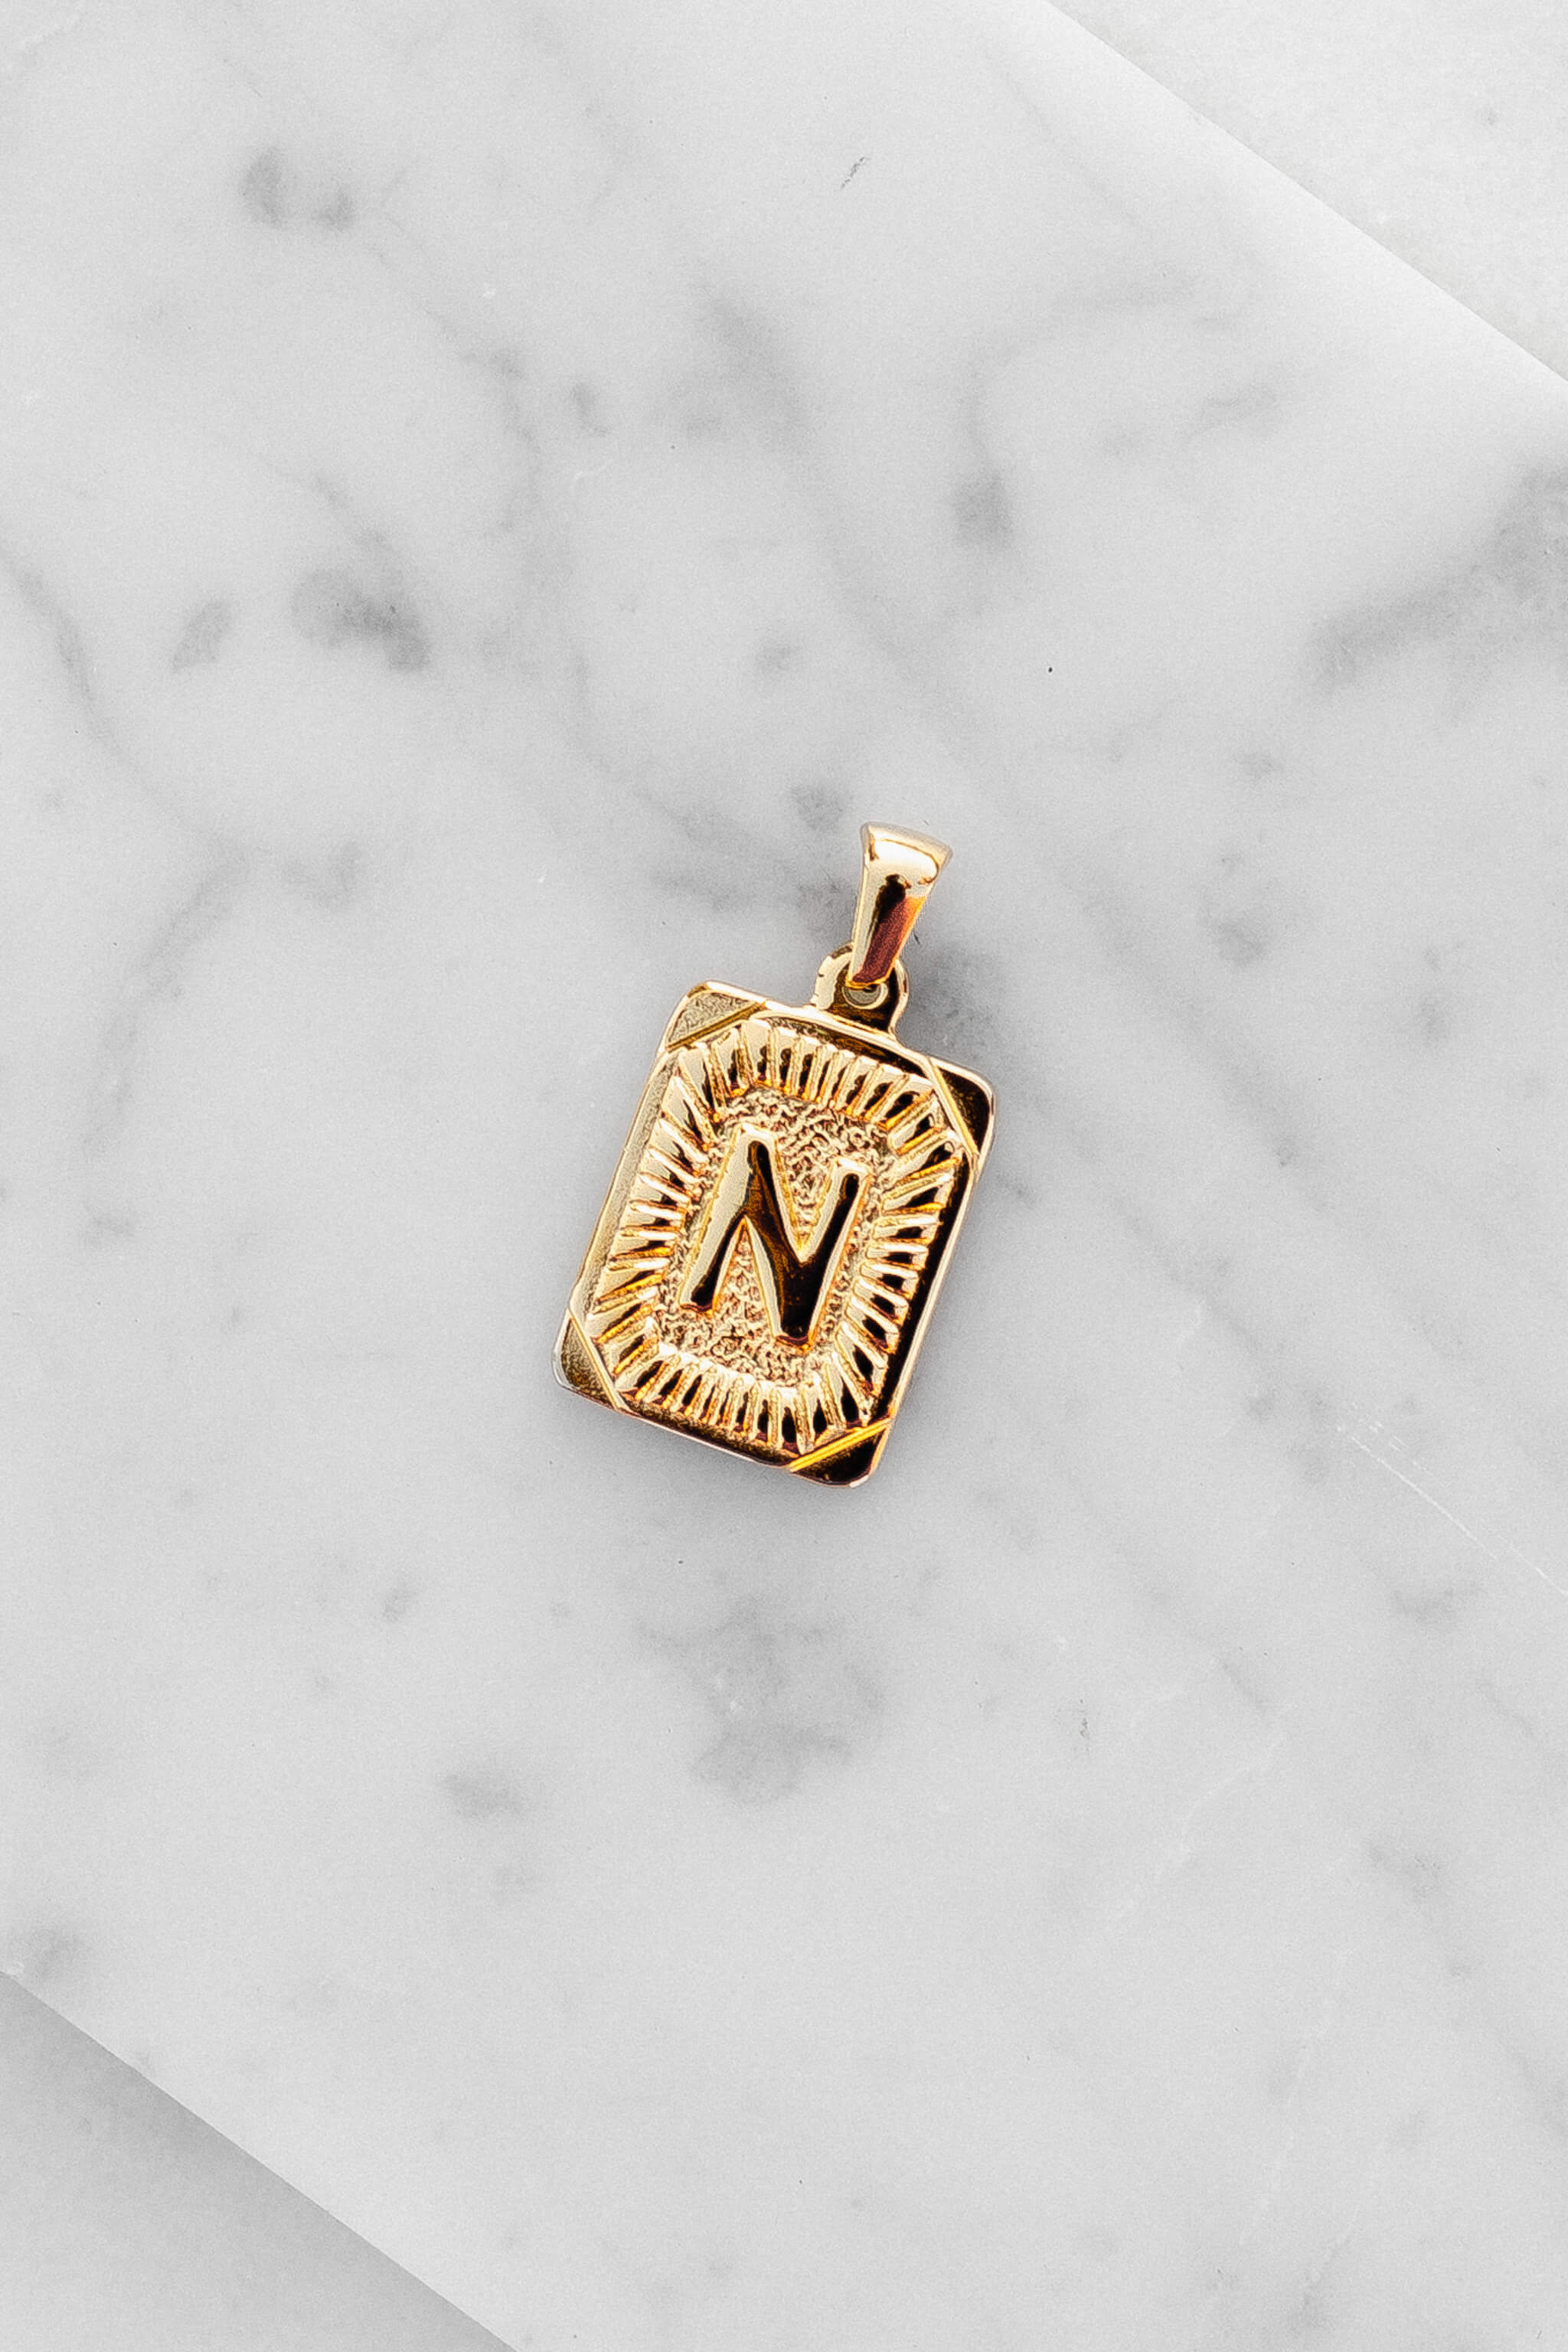 Gold Monogram Letter "N" Charm laying on a marble